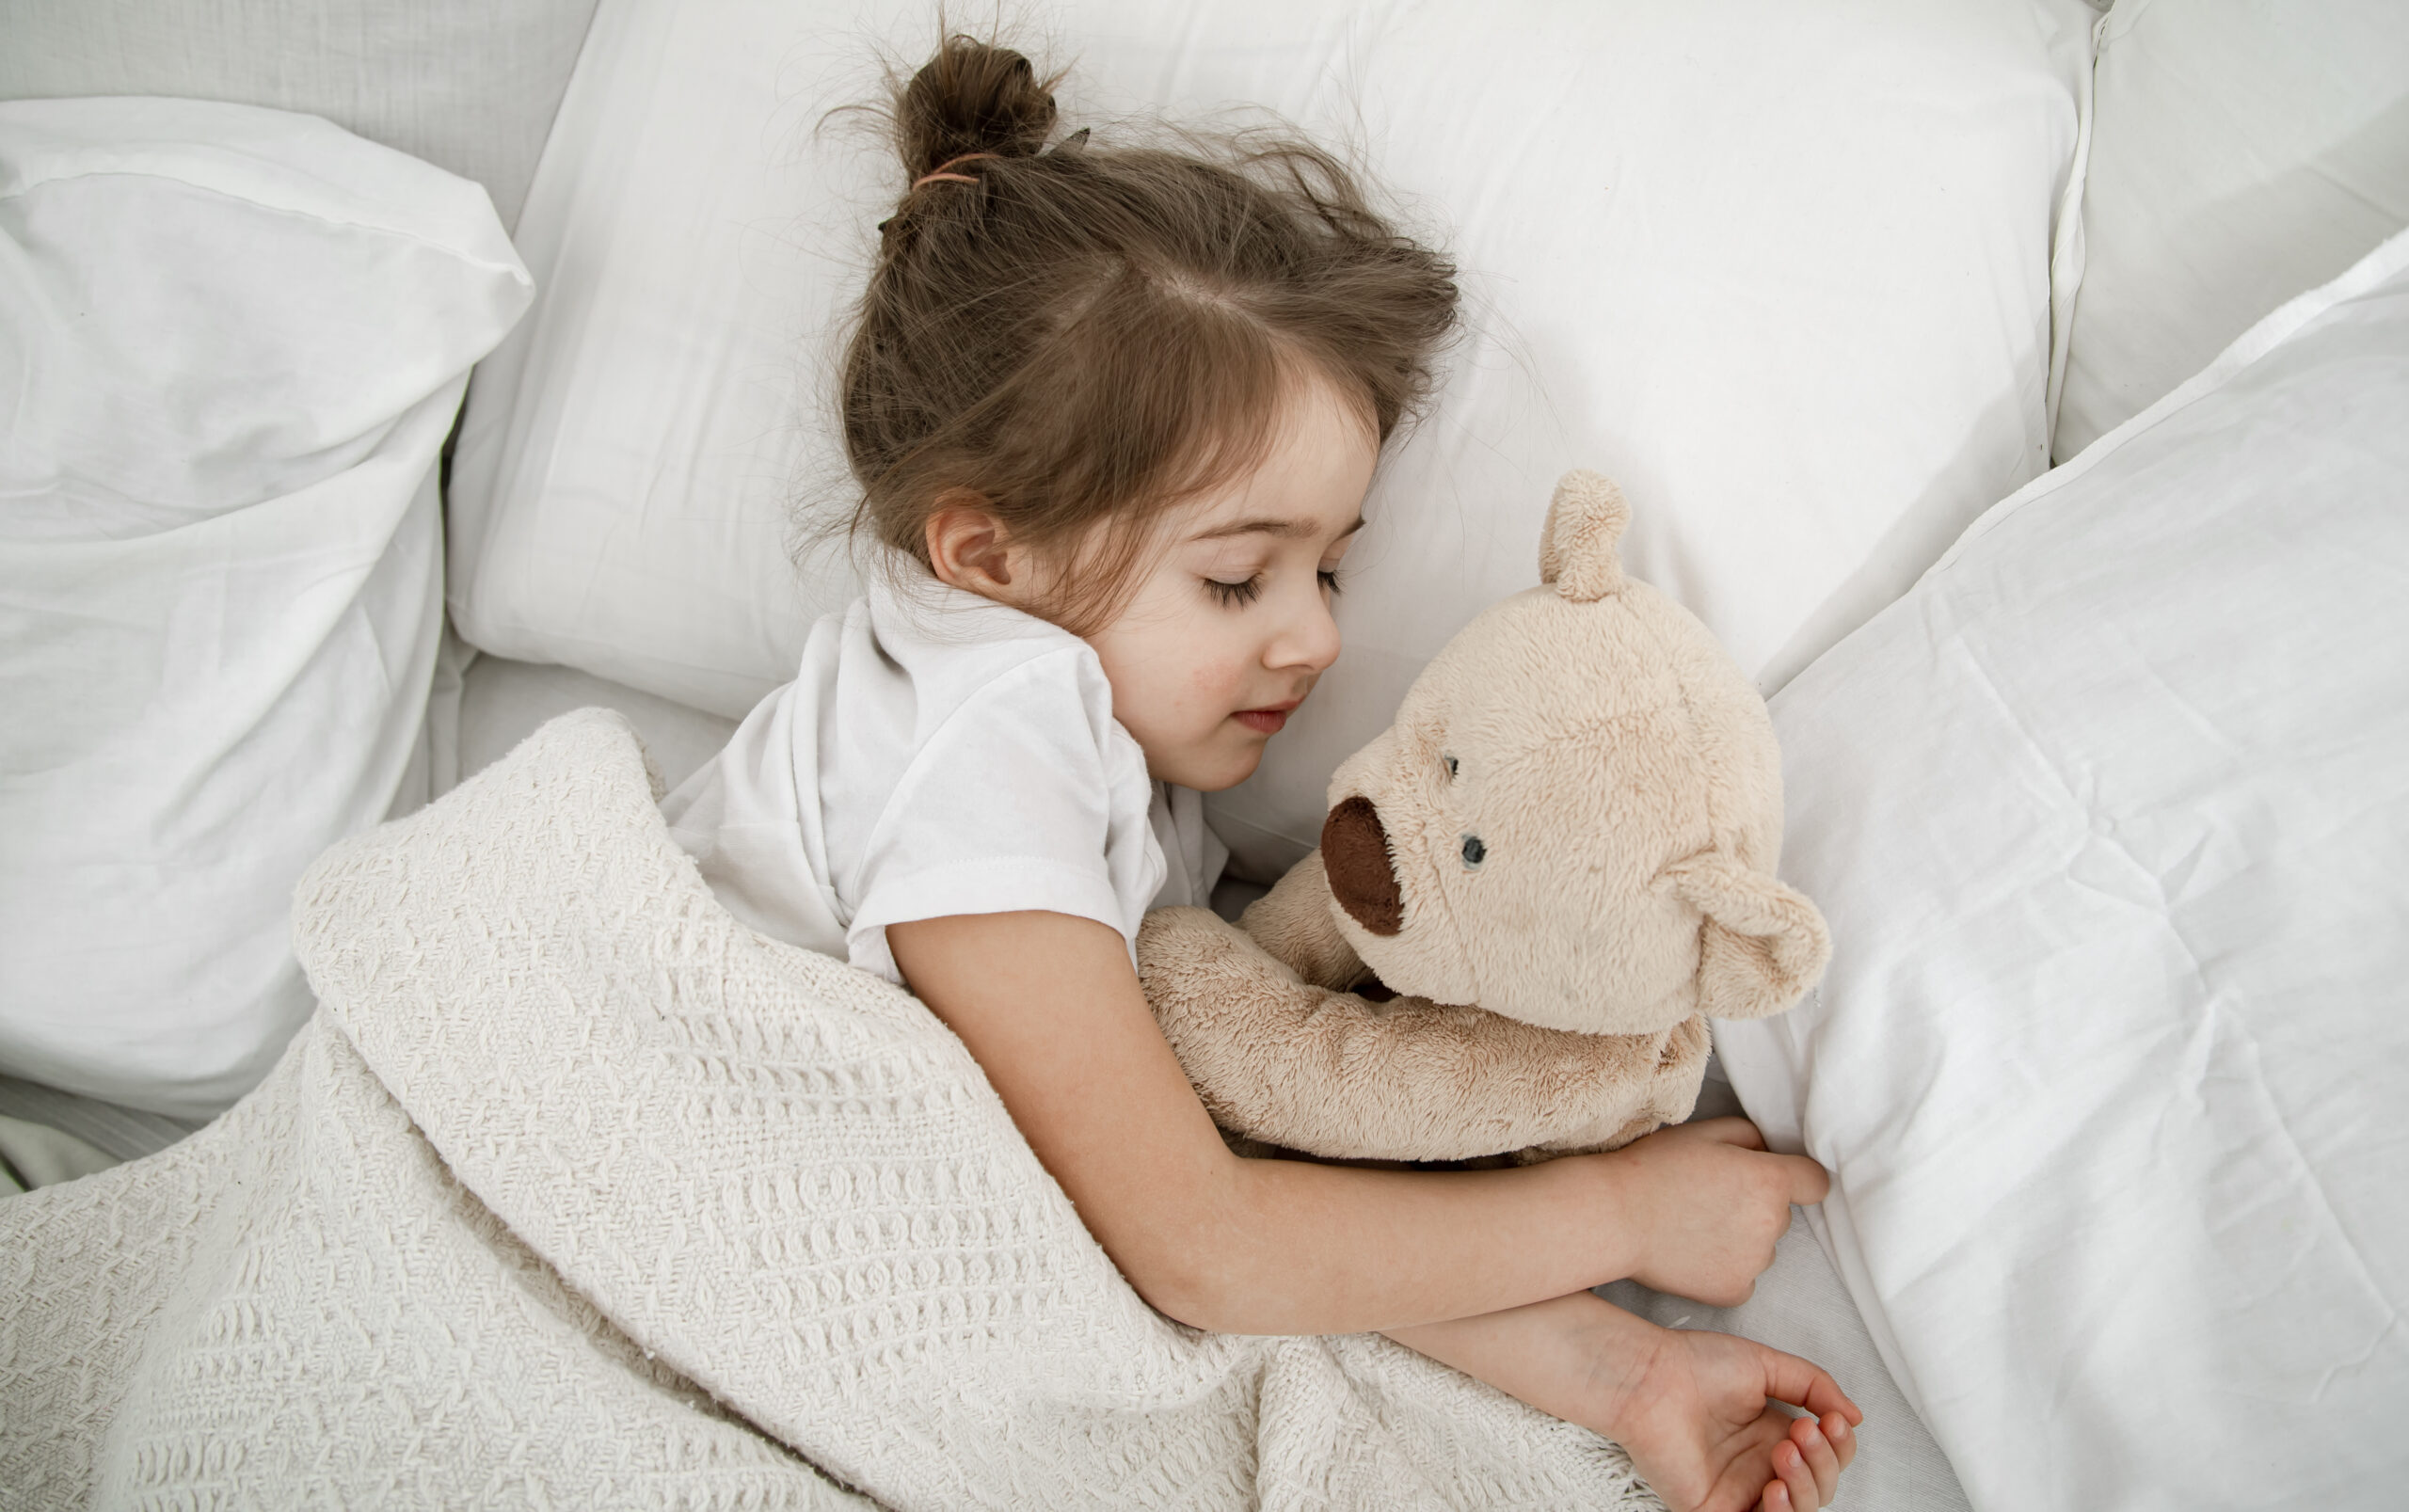 How to Help Your Child Sleep Comfortably with a Cold, Cough, or Fever